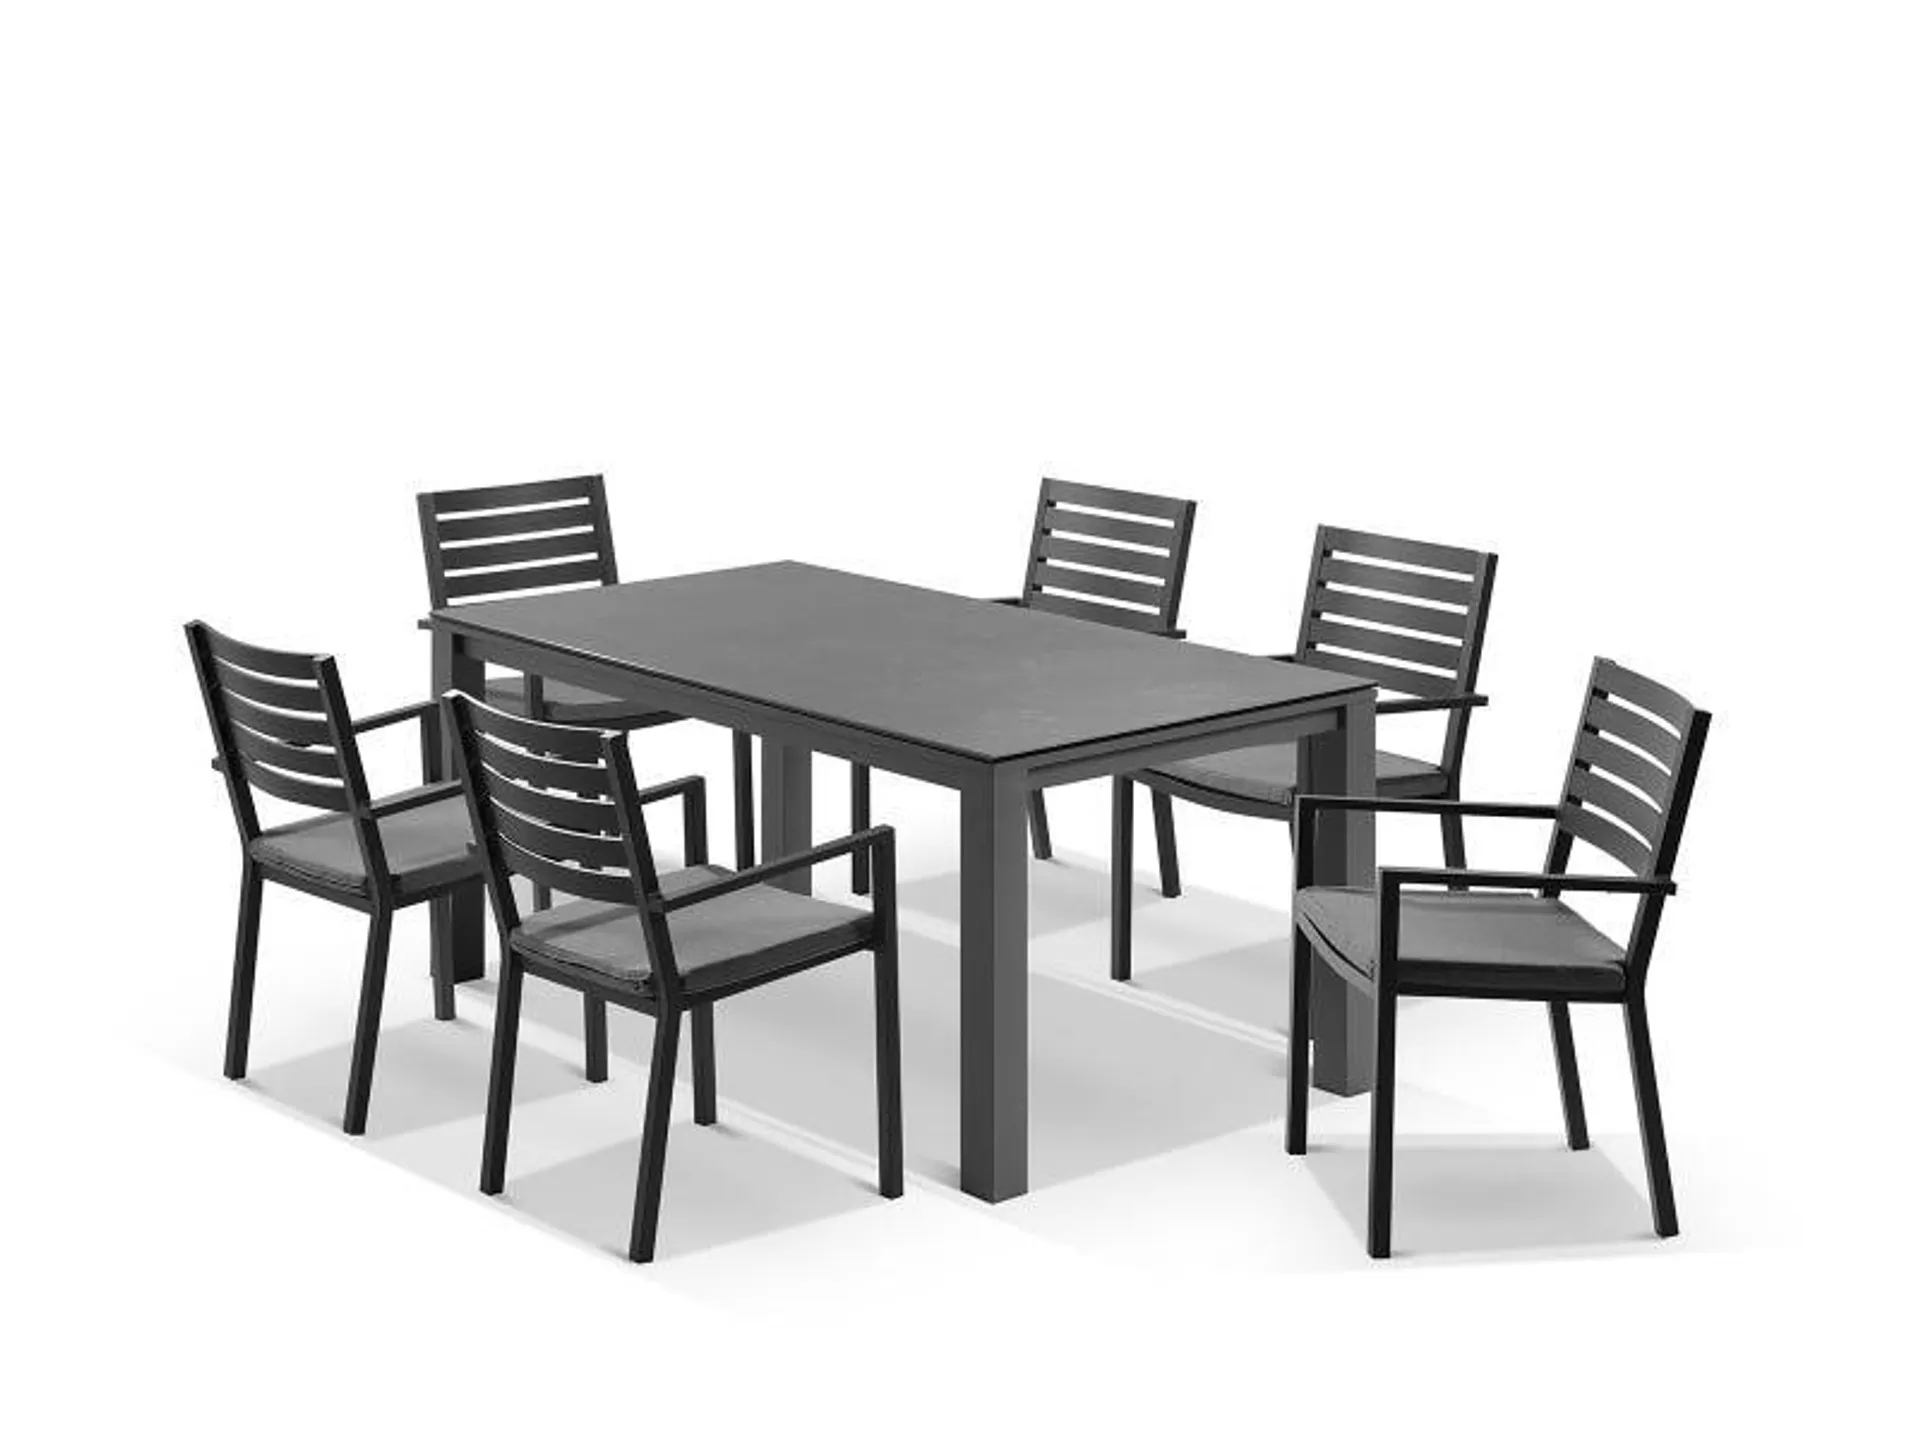 Adele Ceramic table with Mayfair Chairs 7pc Outdoor Dining Setting